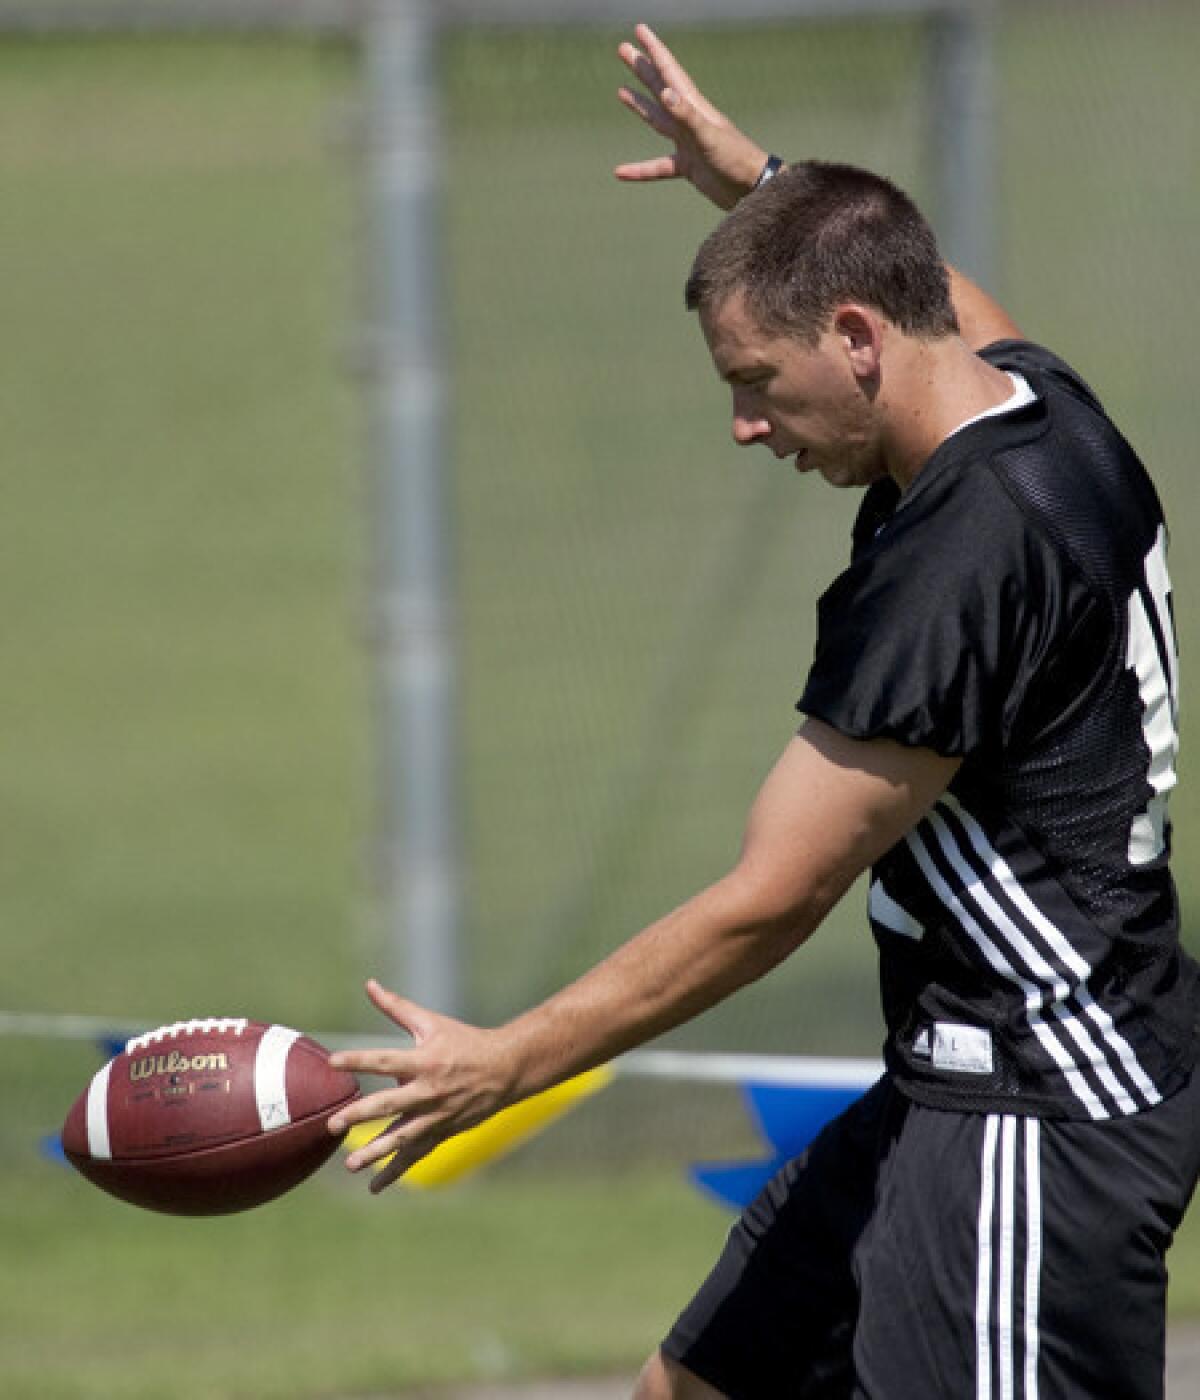 UCLA punter Jeff Locke works on his technique during summer camp at Cal State San Bernardino in August.